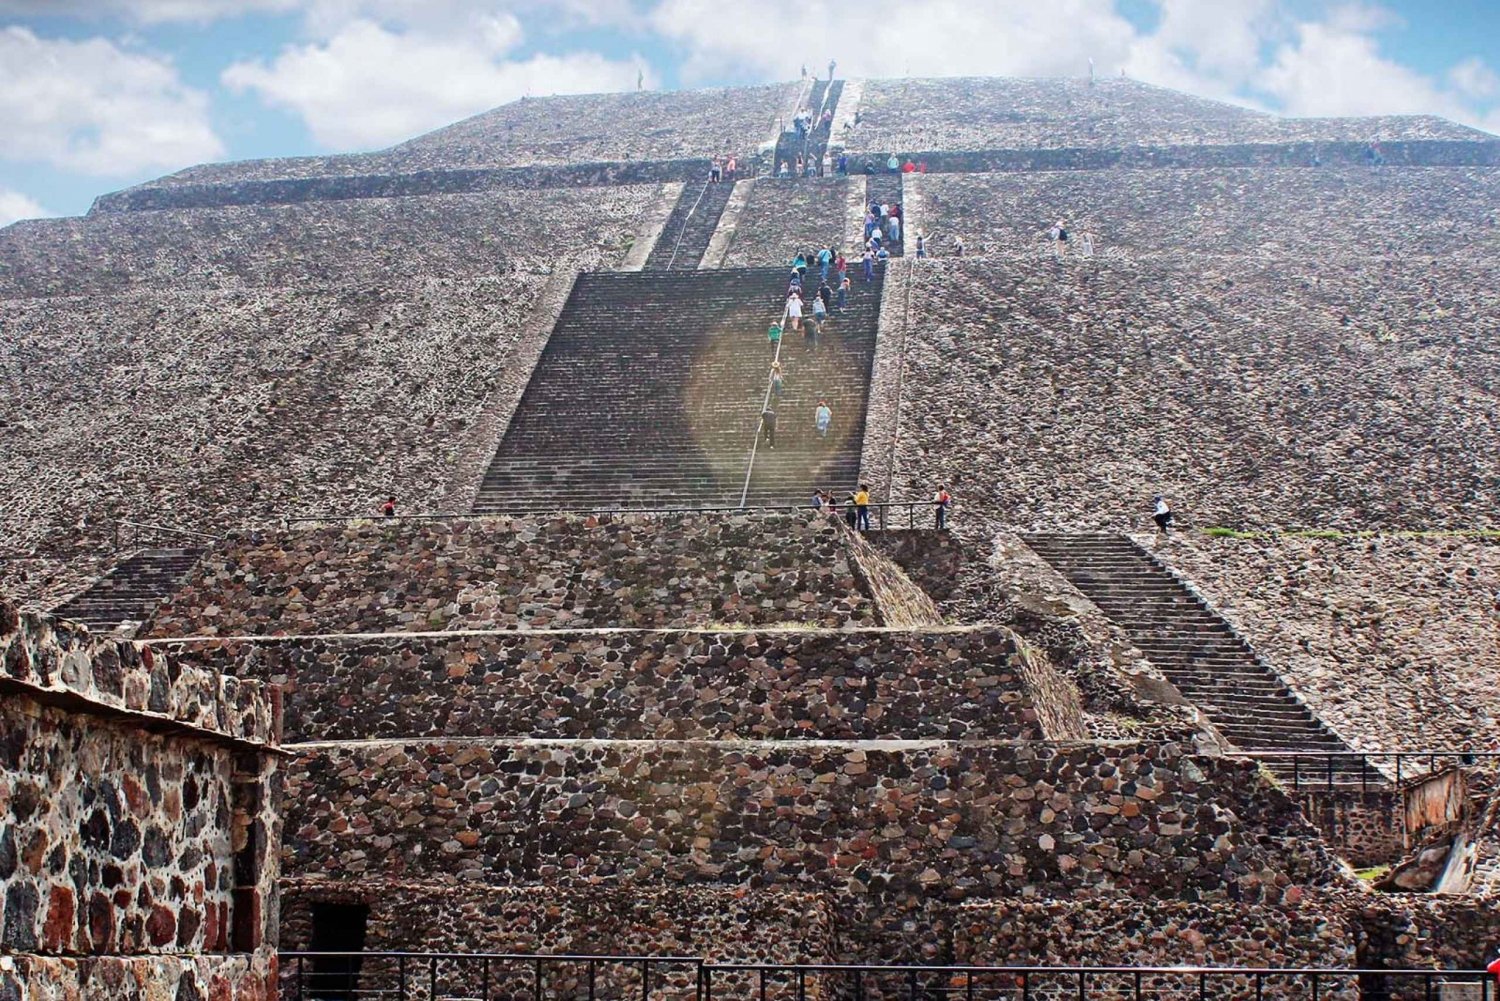 Mexico: Full-Day Teotihuacan & Basilica Guadalupe Tour